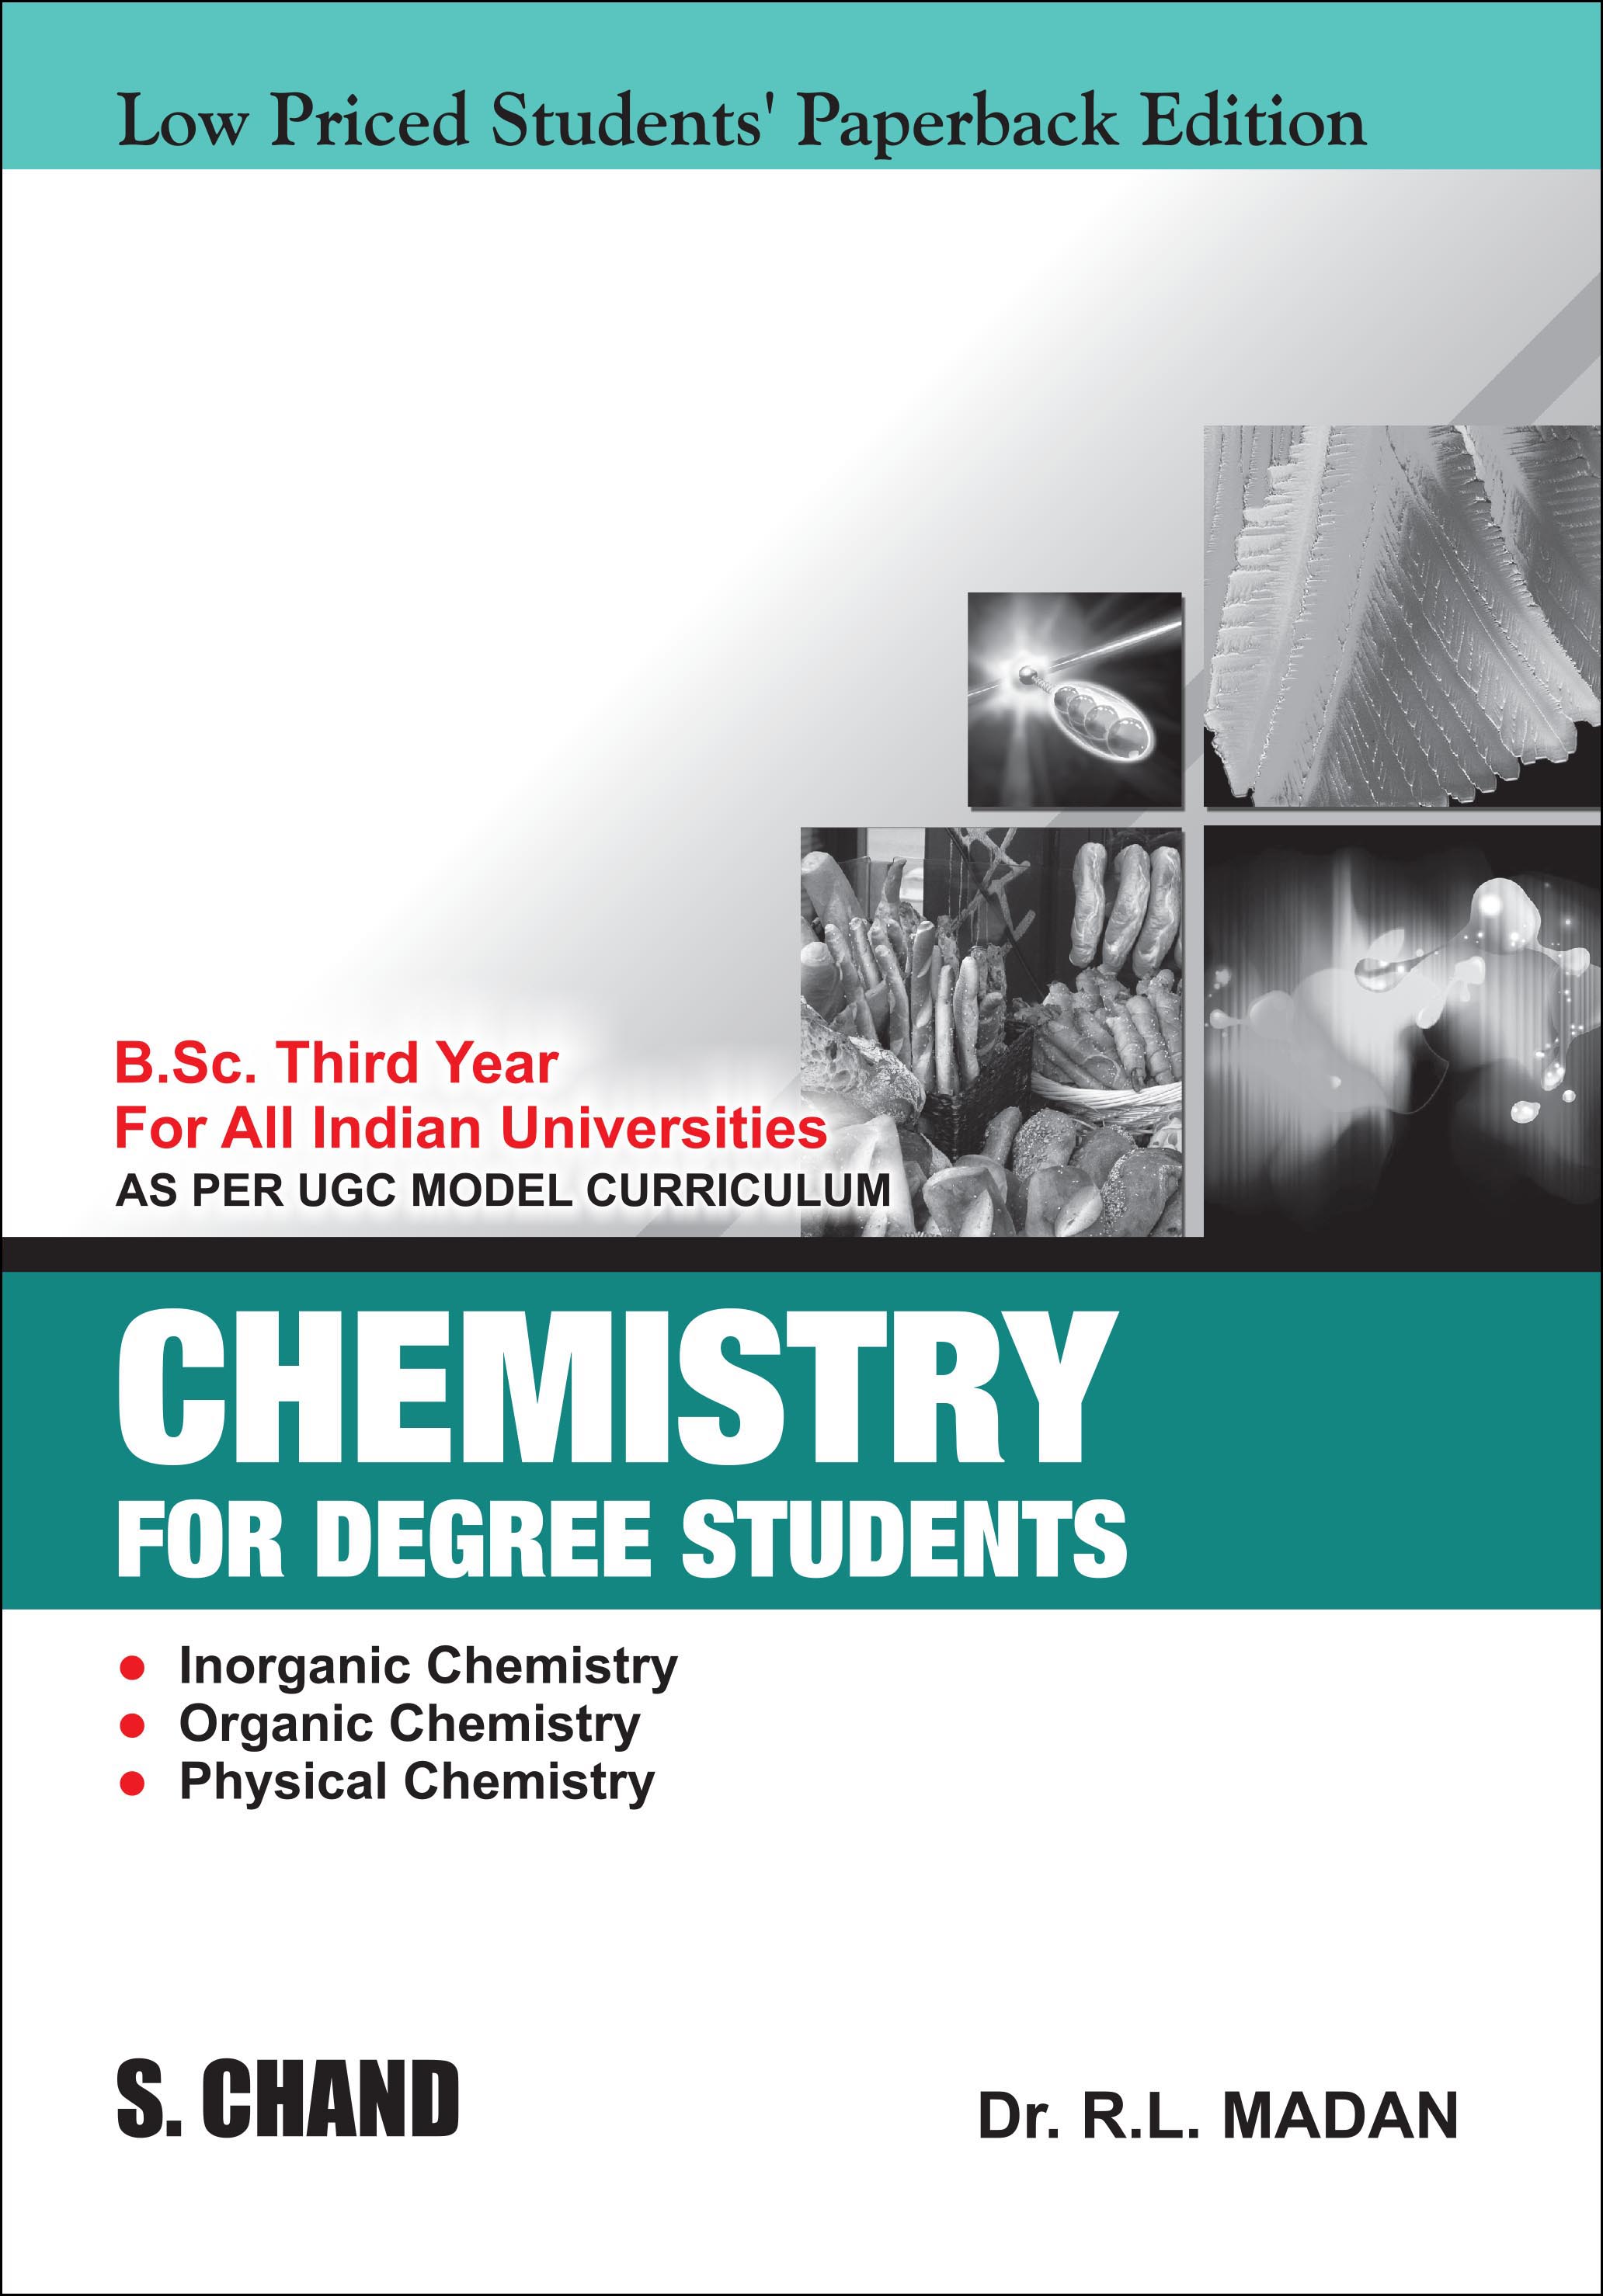 Chemistry for Degree Students B.Sc. 3rd Year (LPSPE)